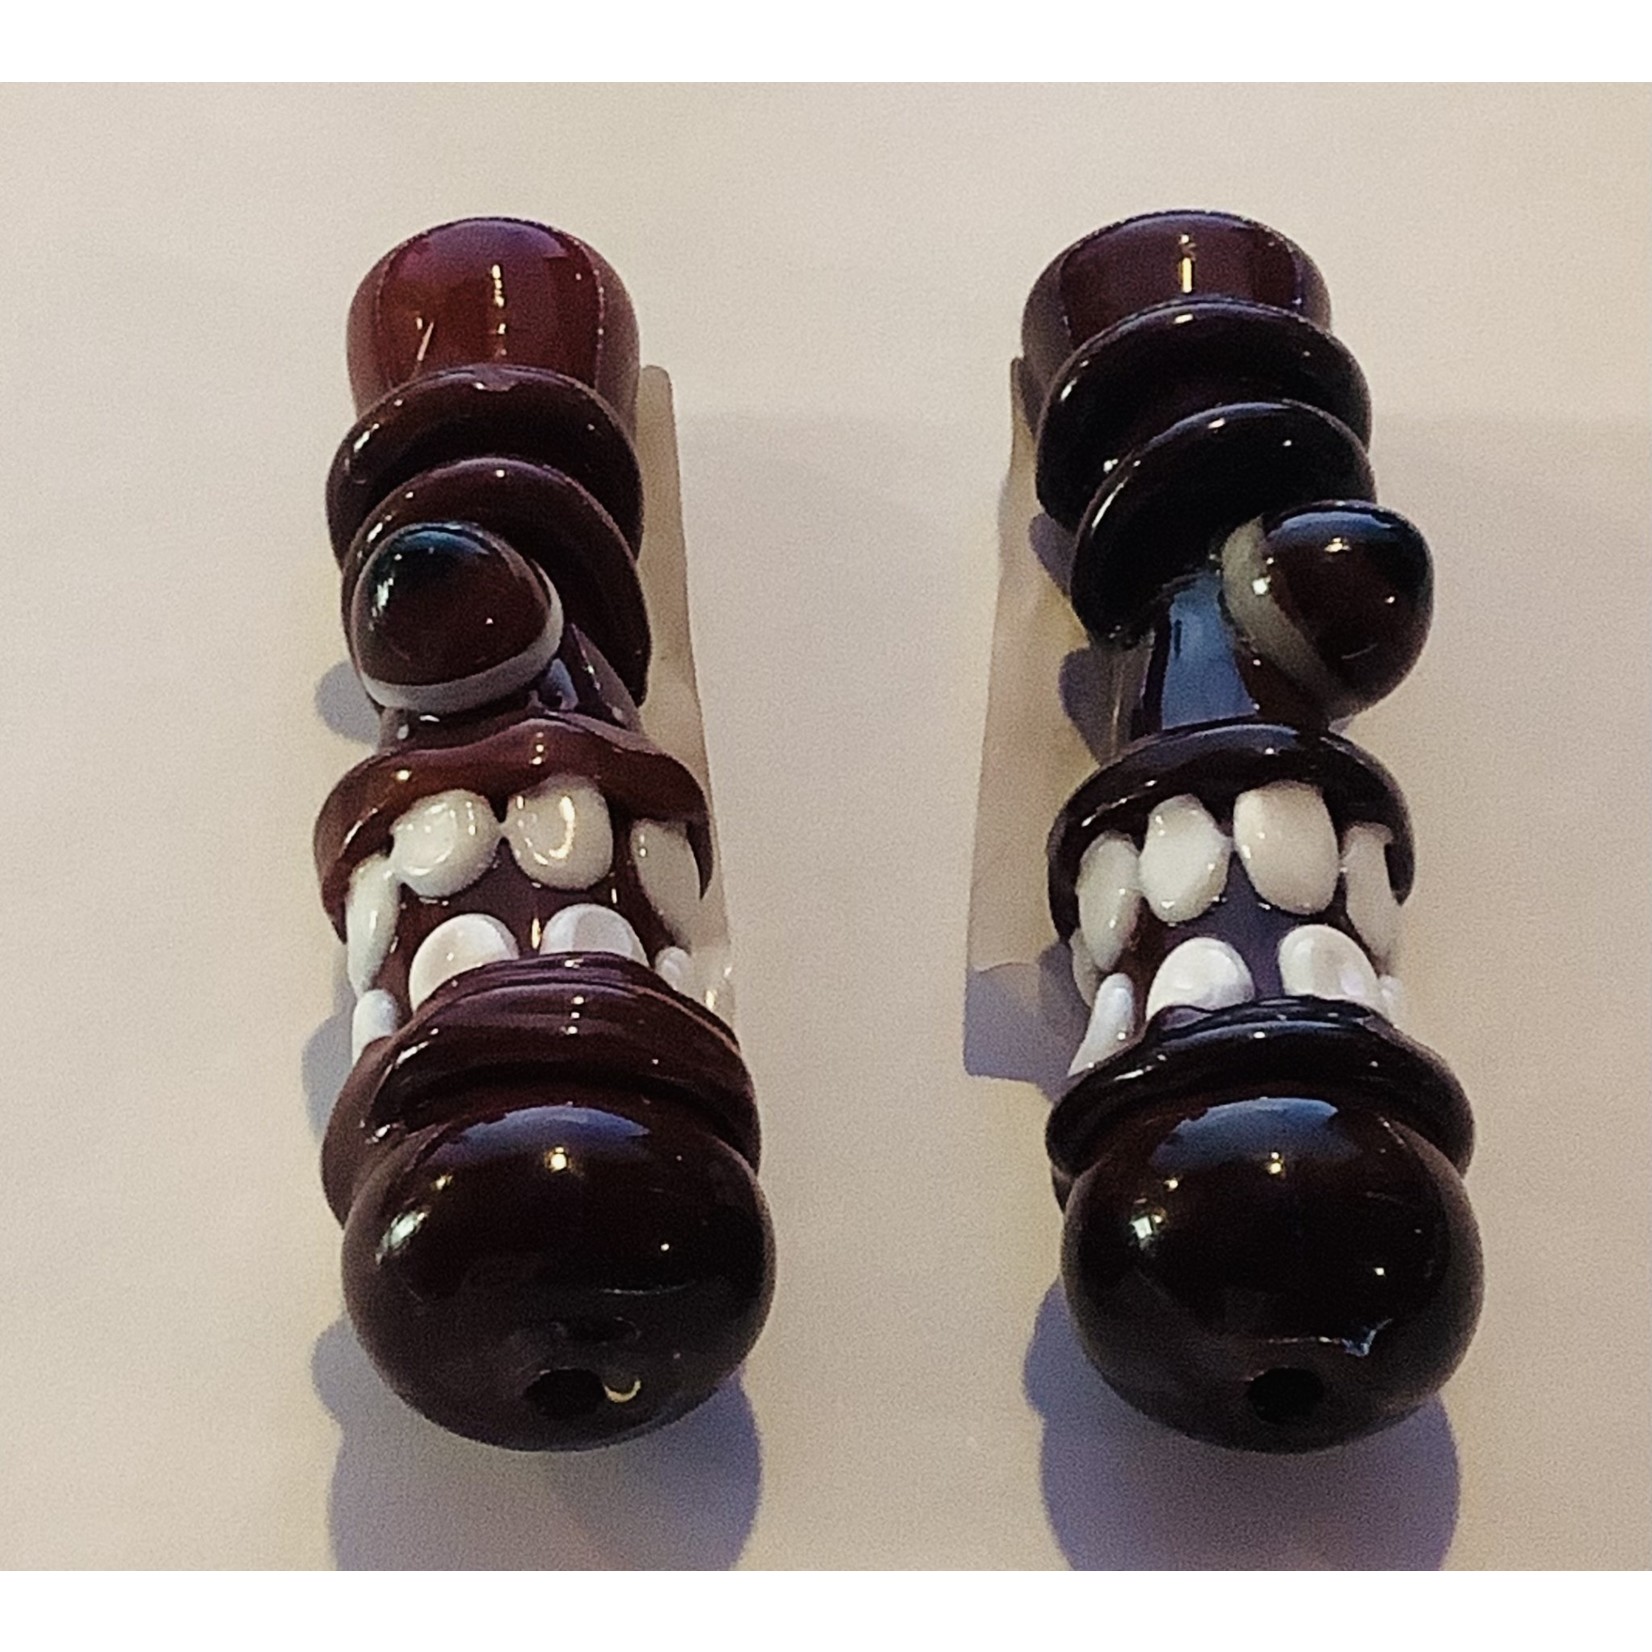 HS Wholesale 3.5" Cyclops Chillum Hand Pipe